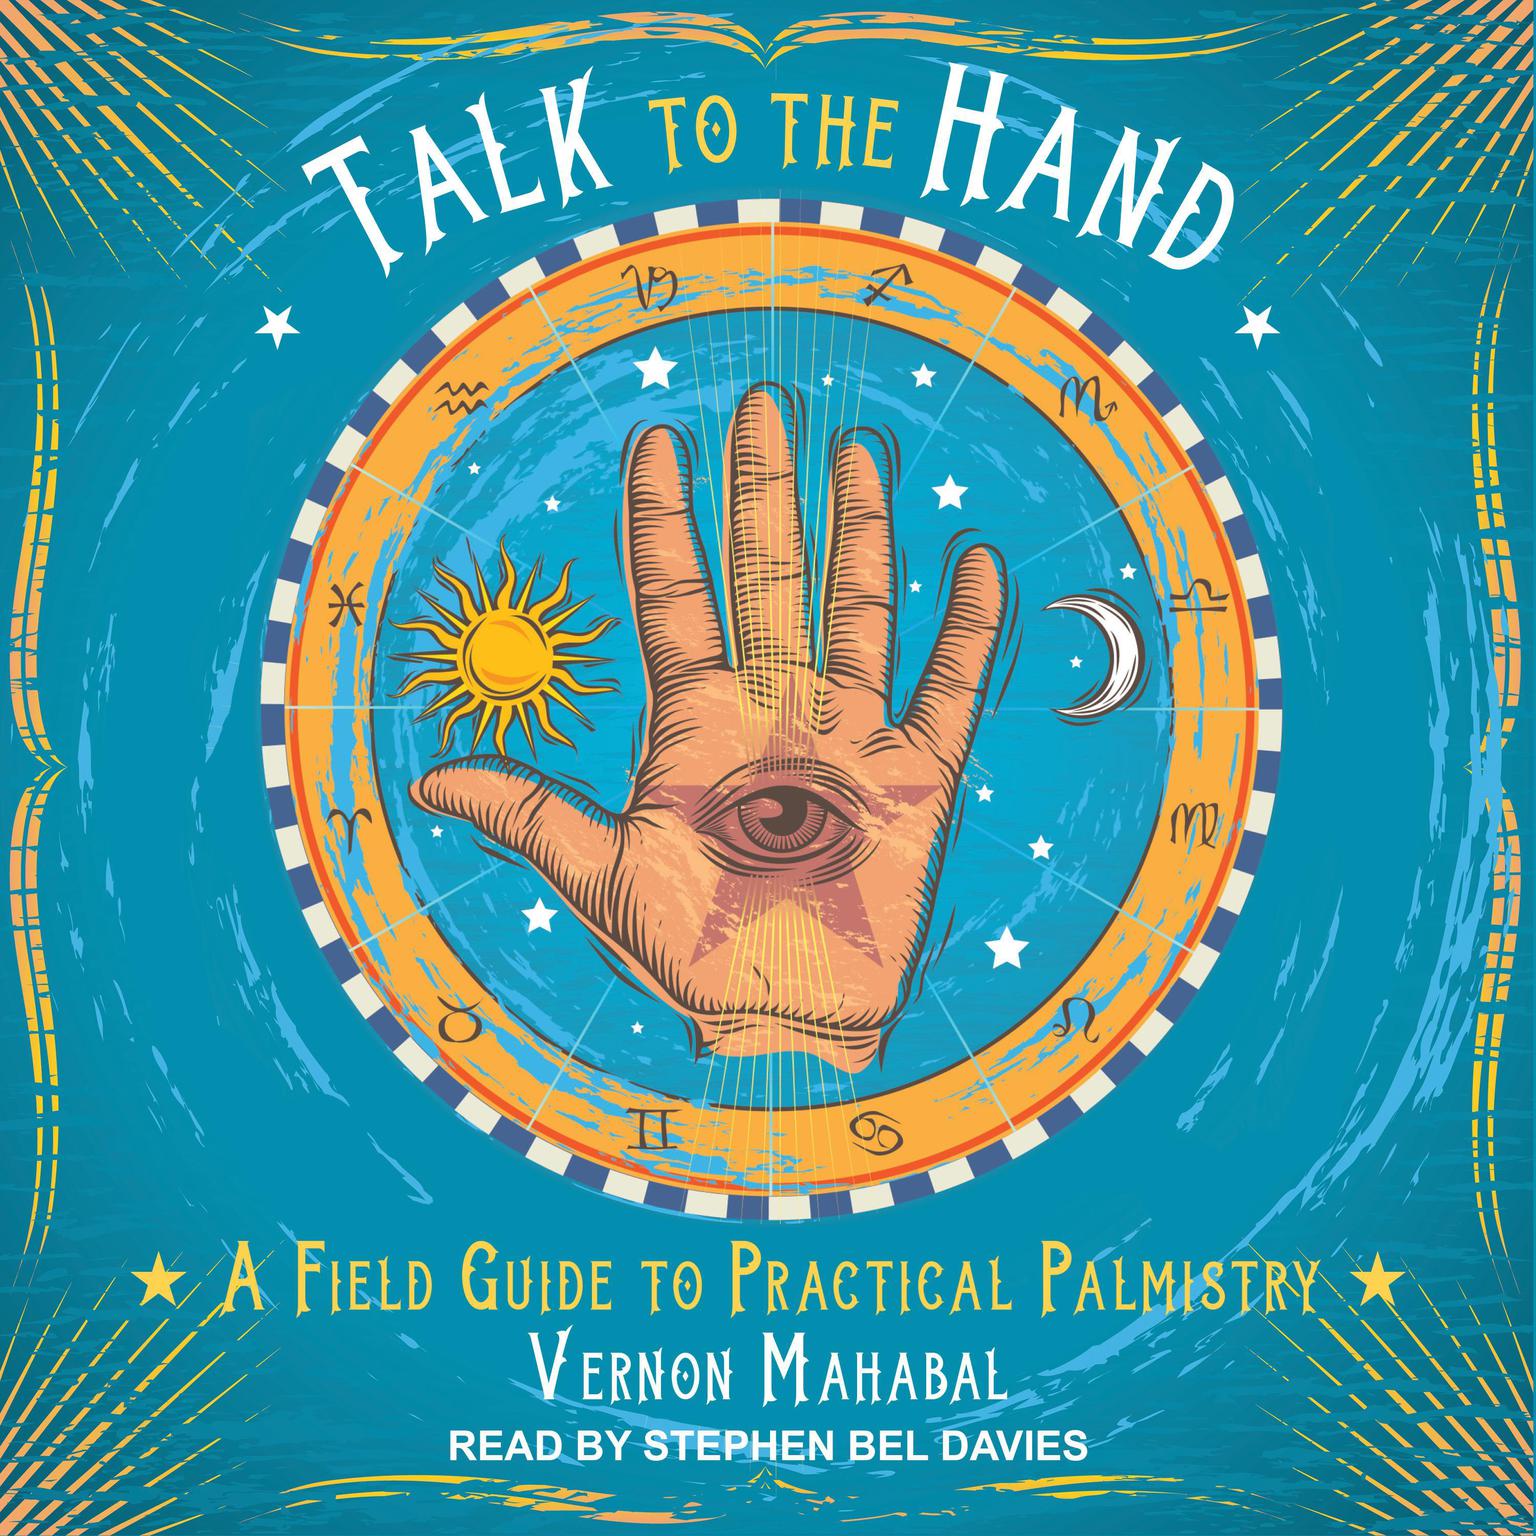 Talk to the Hand: A Field Guide to Practical Palmistry Audiobook, by Vernon Mahabal